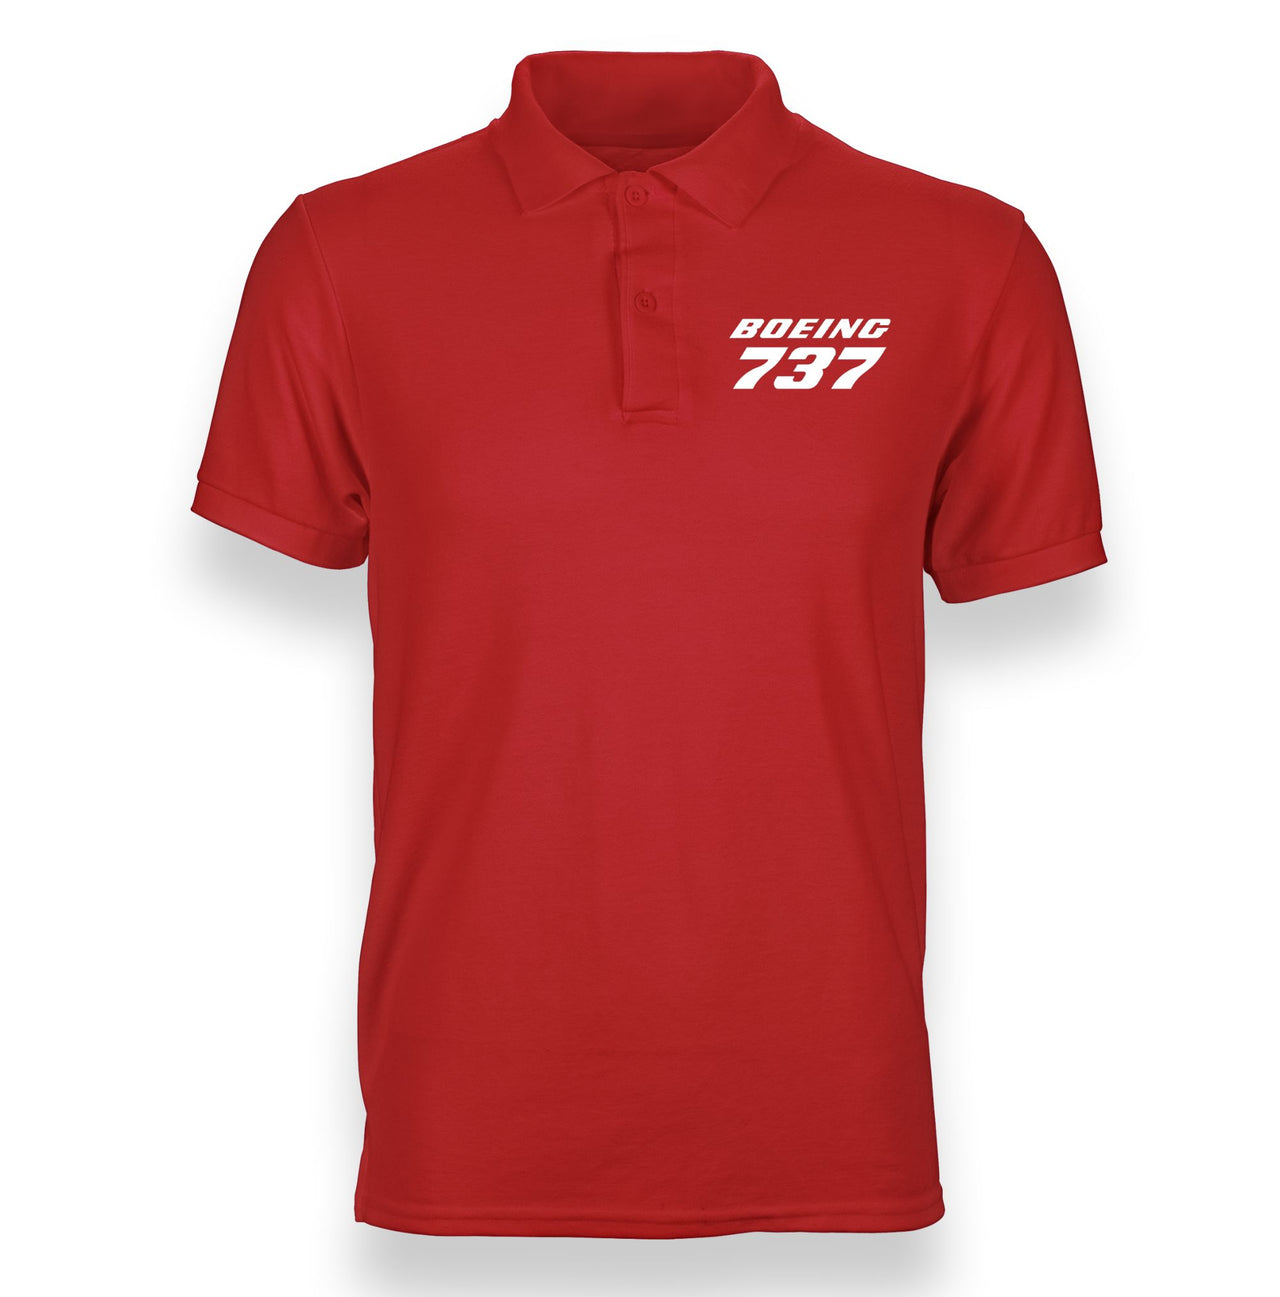 Boeing 737 & Text Designed "WOMEN" Polo T-Shirts